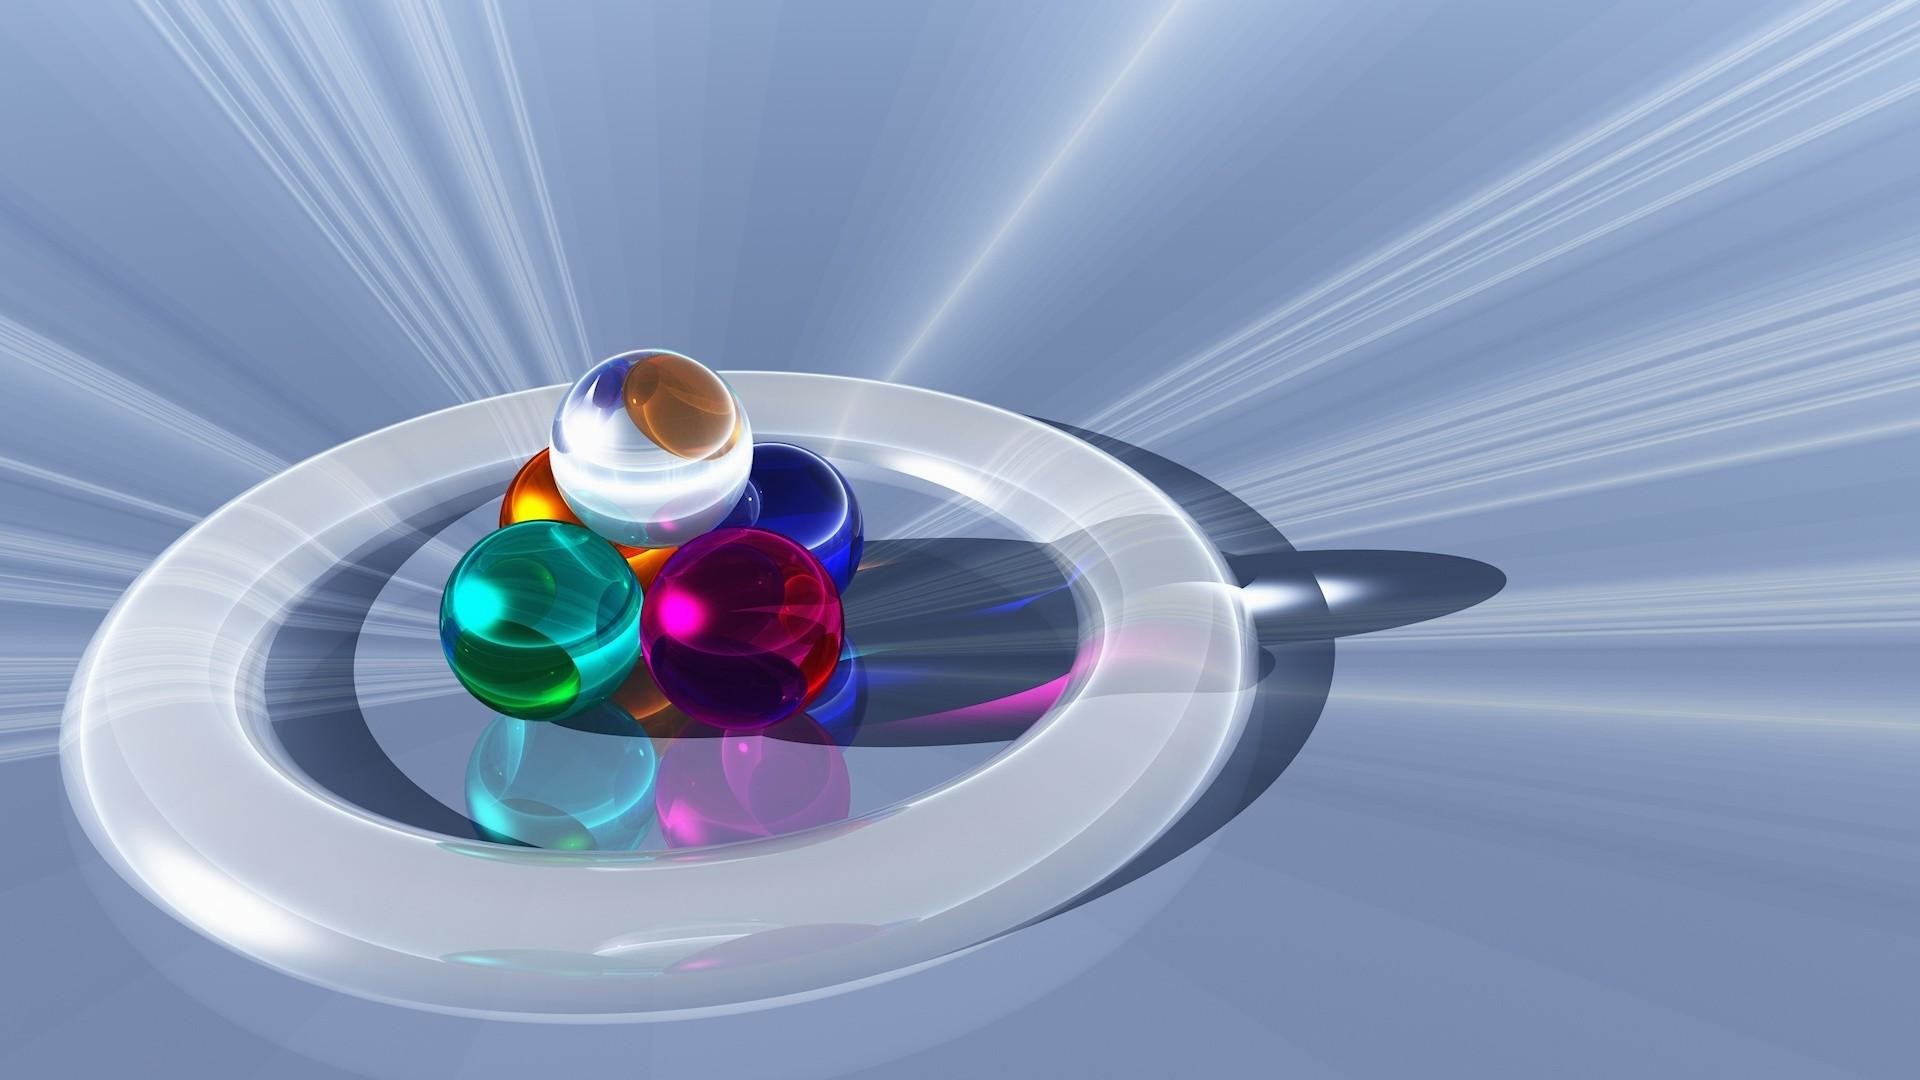 wallpaper hp 3d,water,graphic design,colorfulness,technology,circle